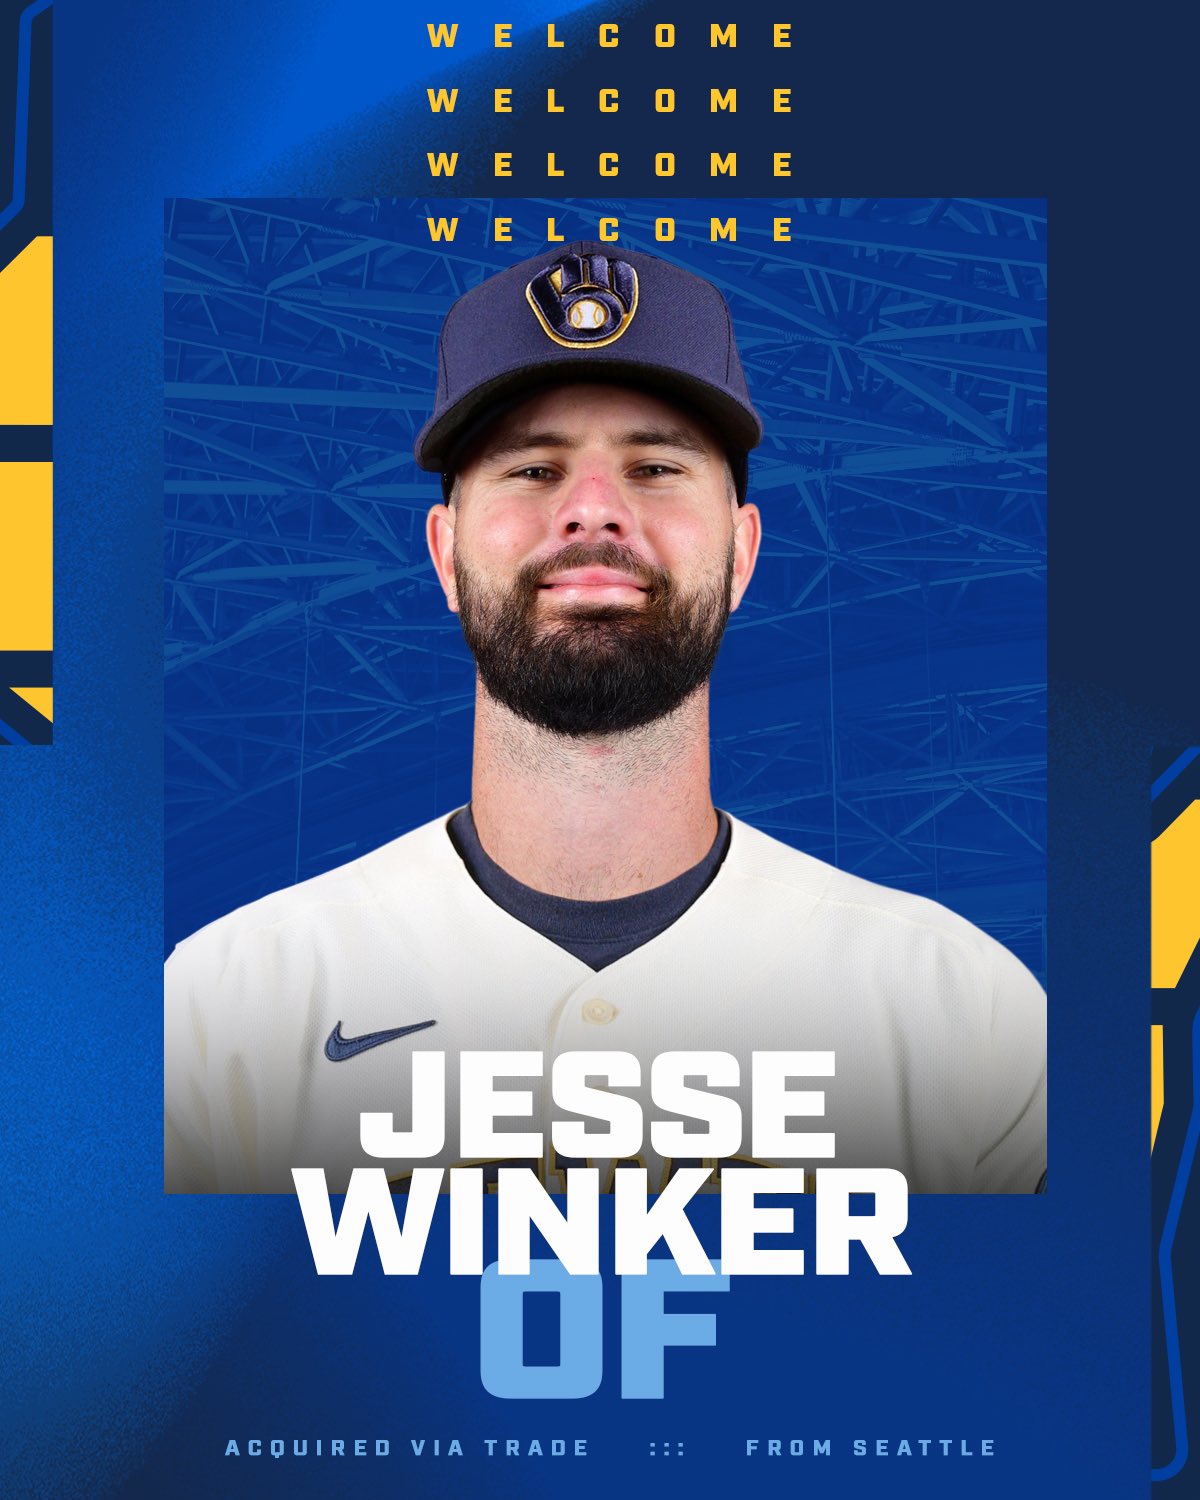 Brewers update on Winker after 2 surgeries.